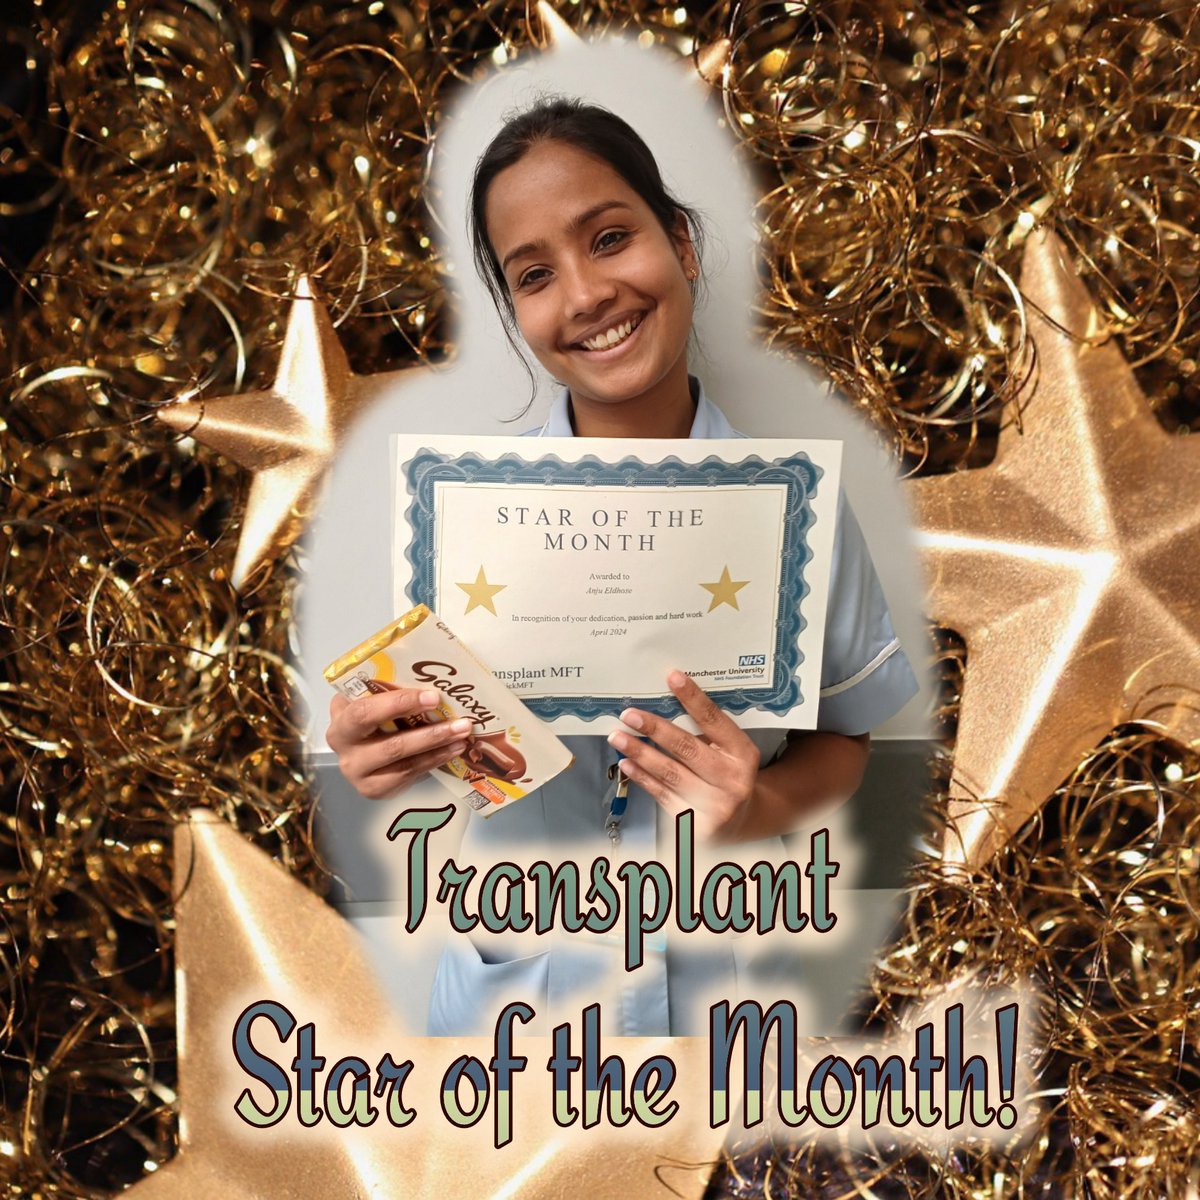 Well done to Team Transplant star of the month in April, Anju, for her hard work on the ward & for smiling even on difficult days! “Wherever the art of Medicine is loved, there is also a love of Humanity.” @TntTracy73 @vikki_warman @Michaela0895 @parkerkarenj #workfamily #stars